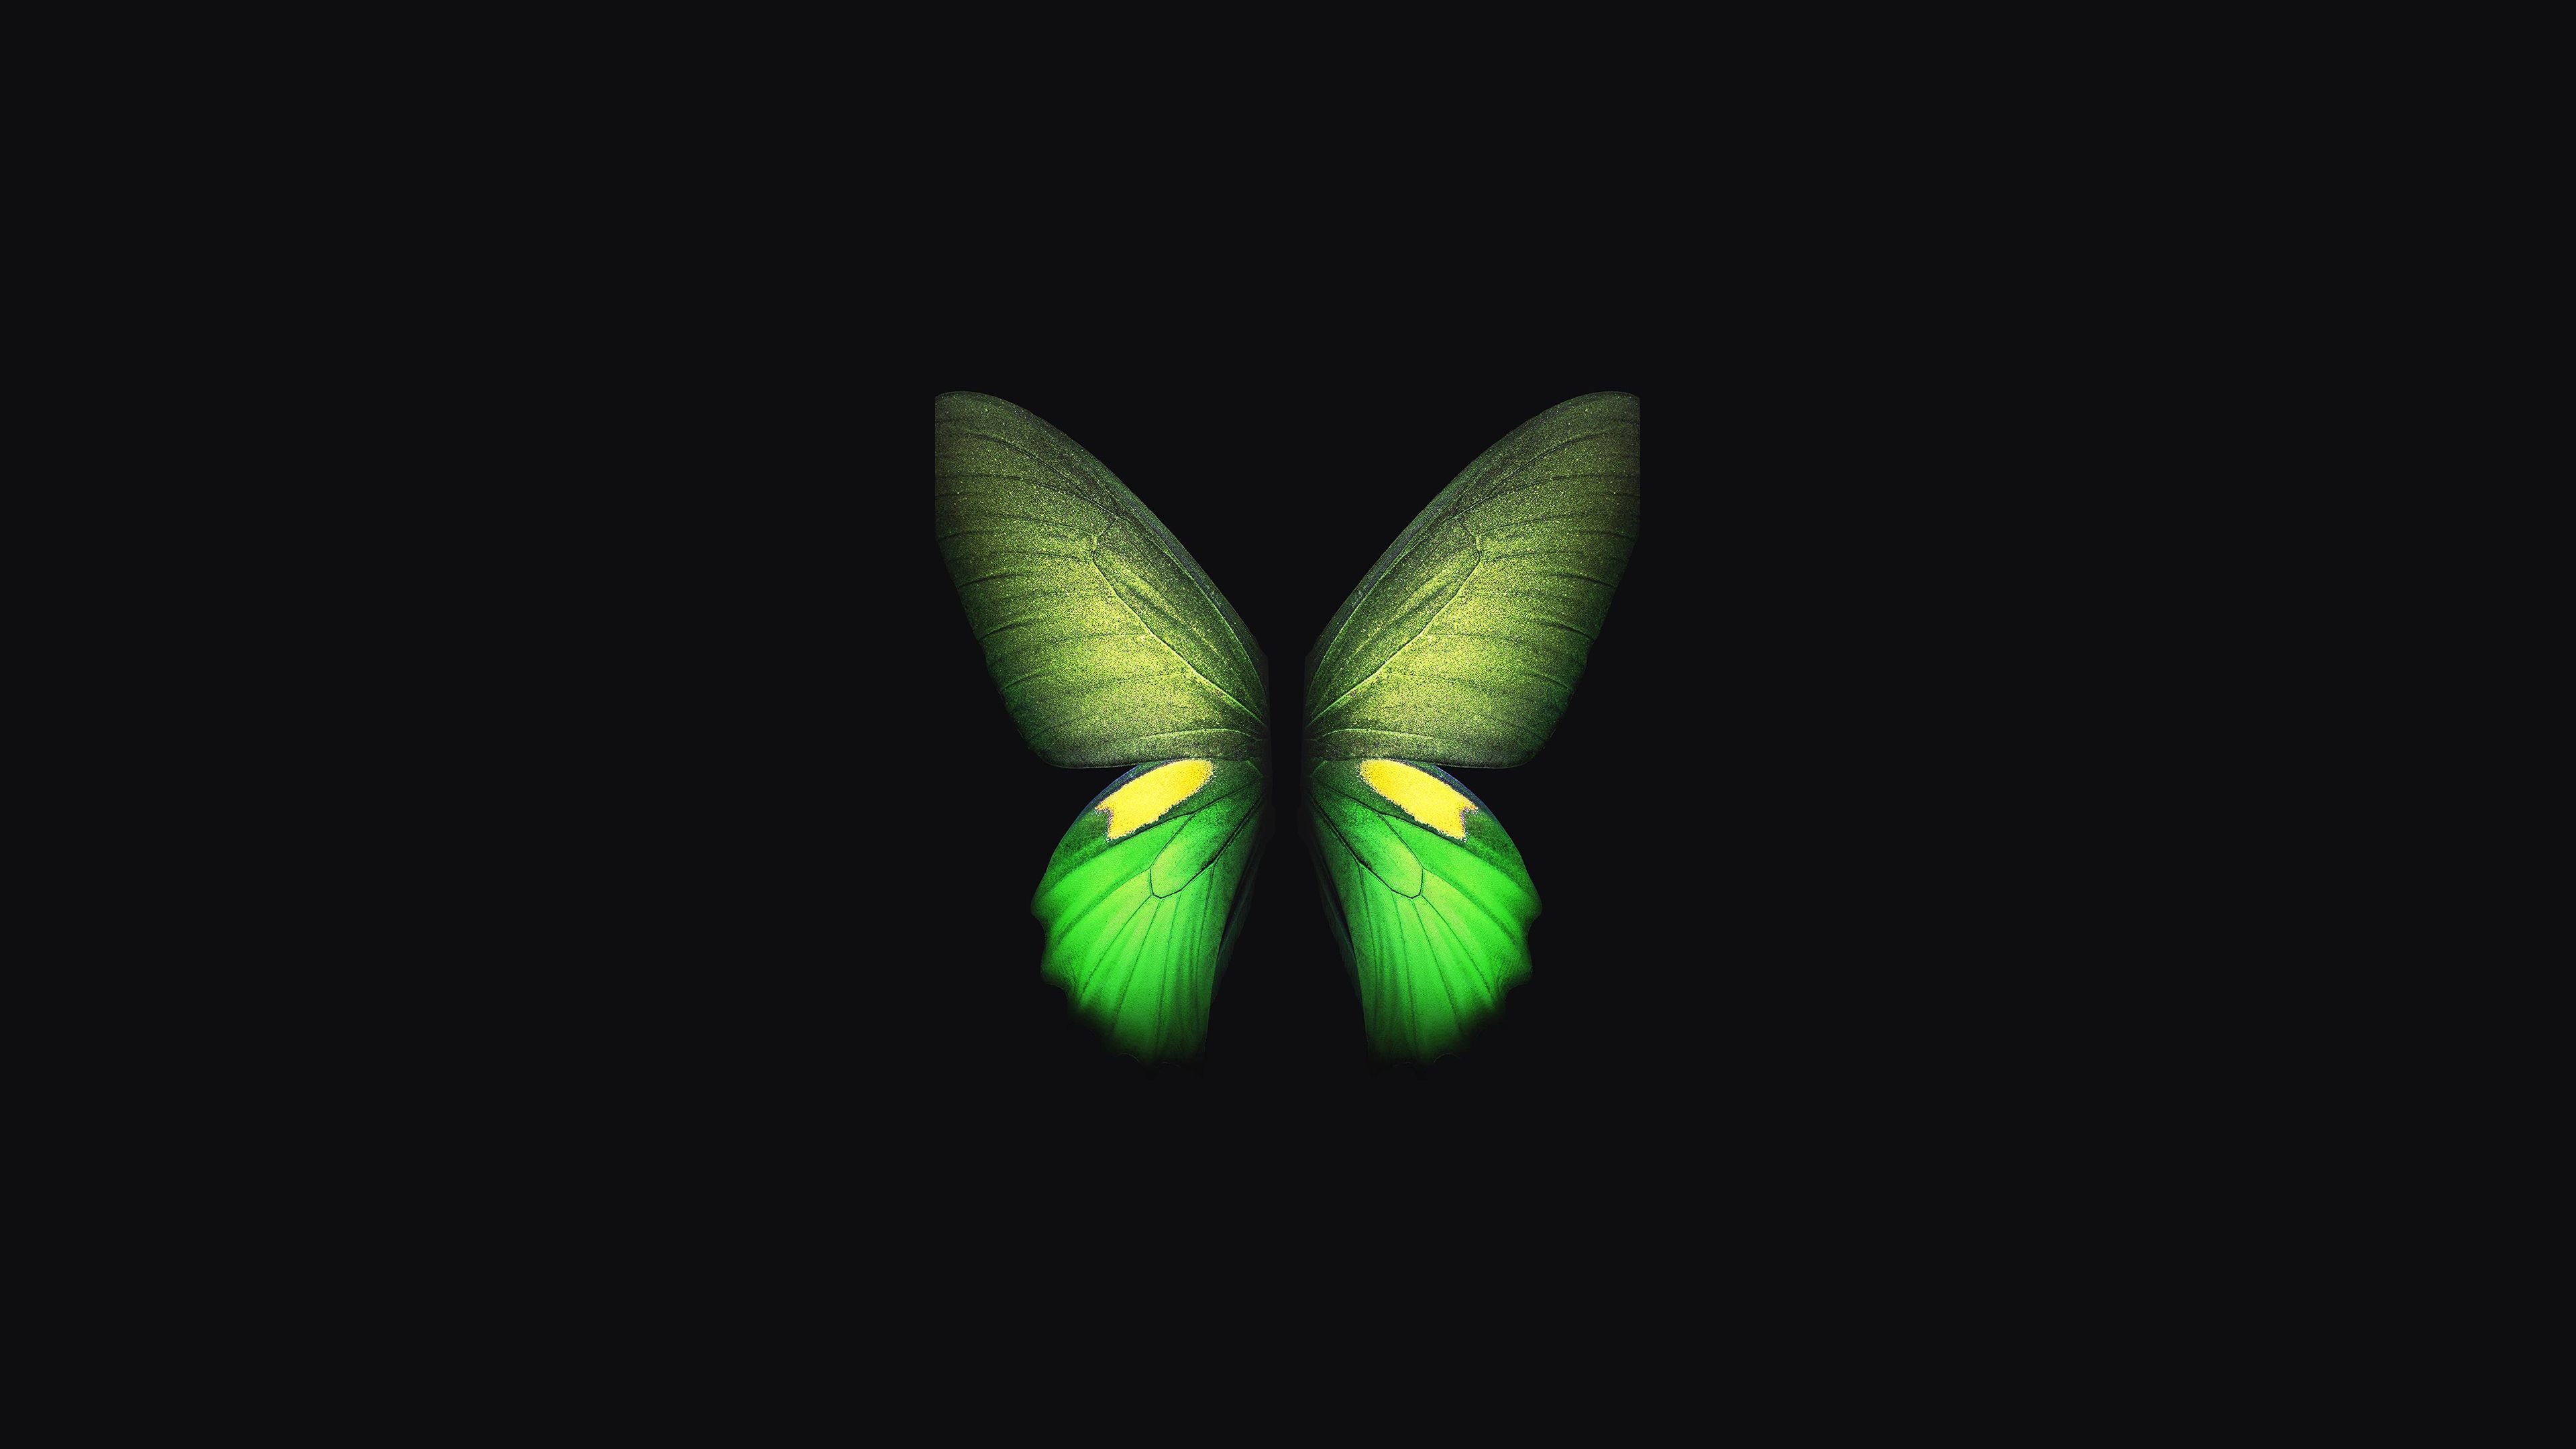 Samsung Galaxy Fold 4k, HD Artist, 4k Wallpaper, Image, Background, Photo and Picture